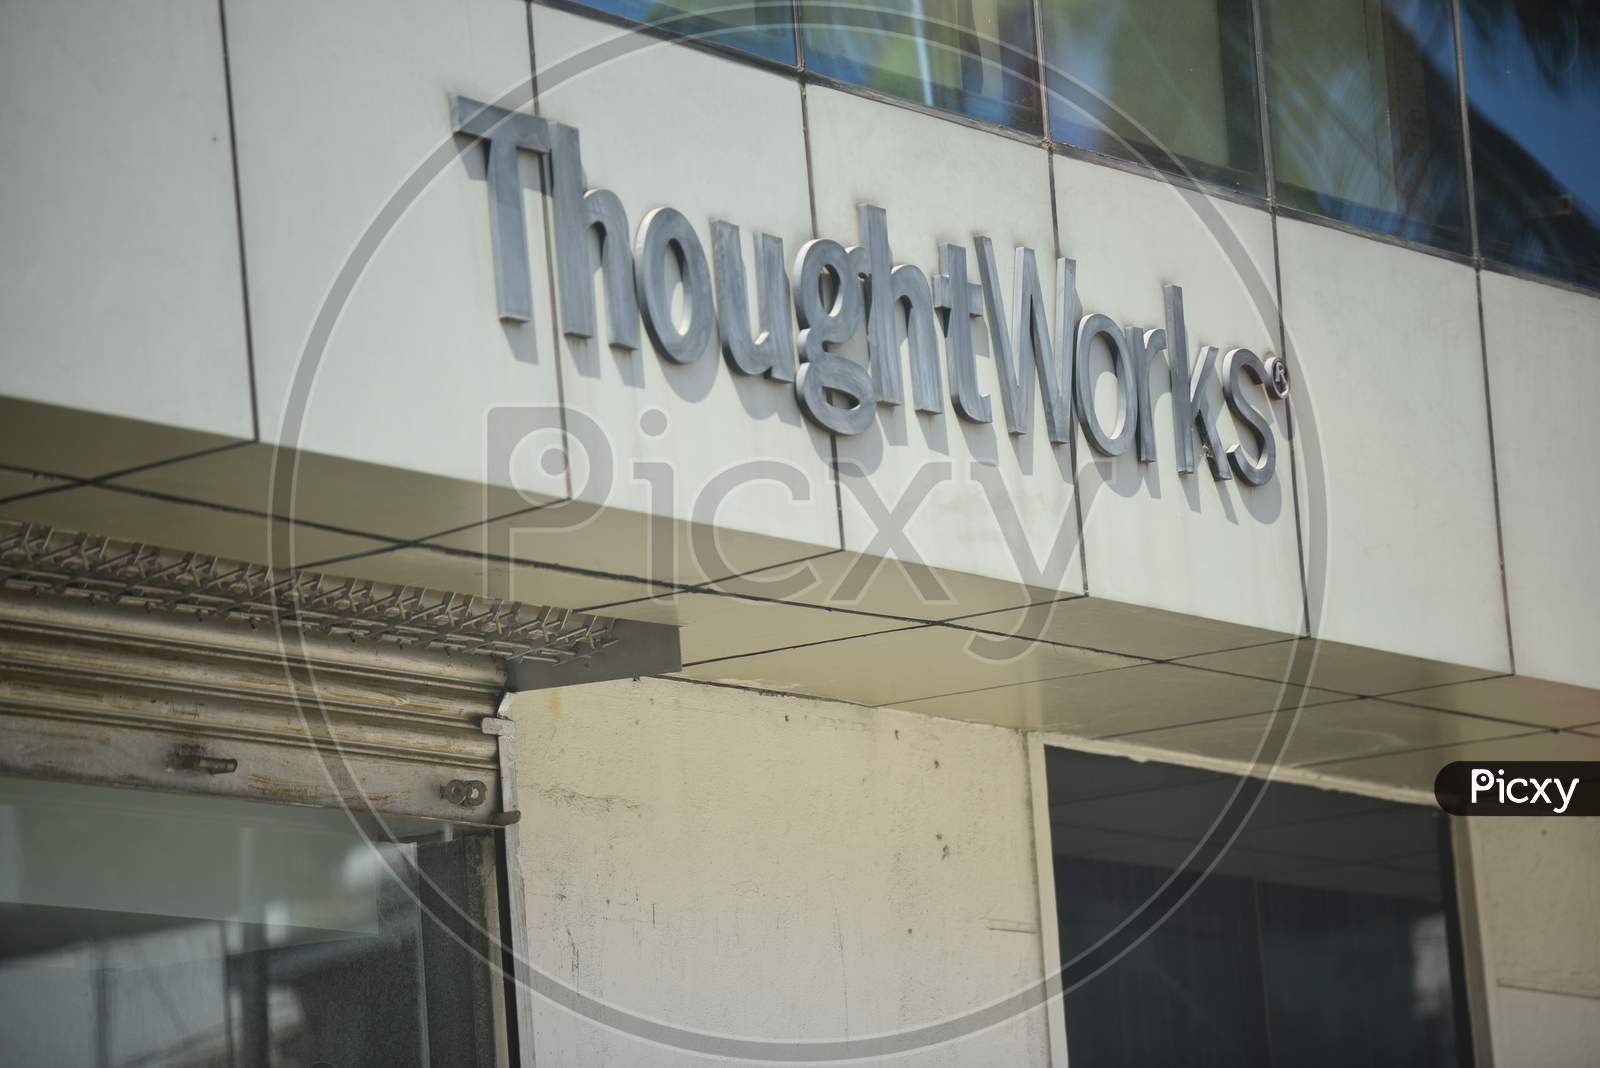 Thoughtworks co working space